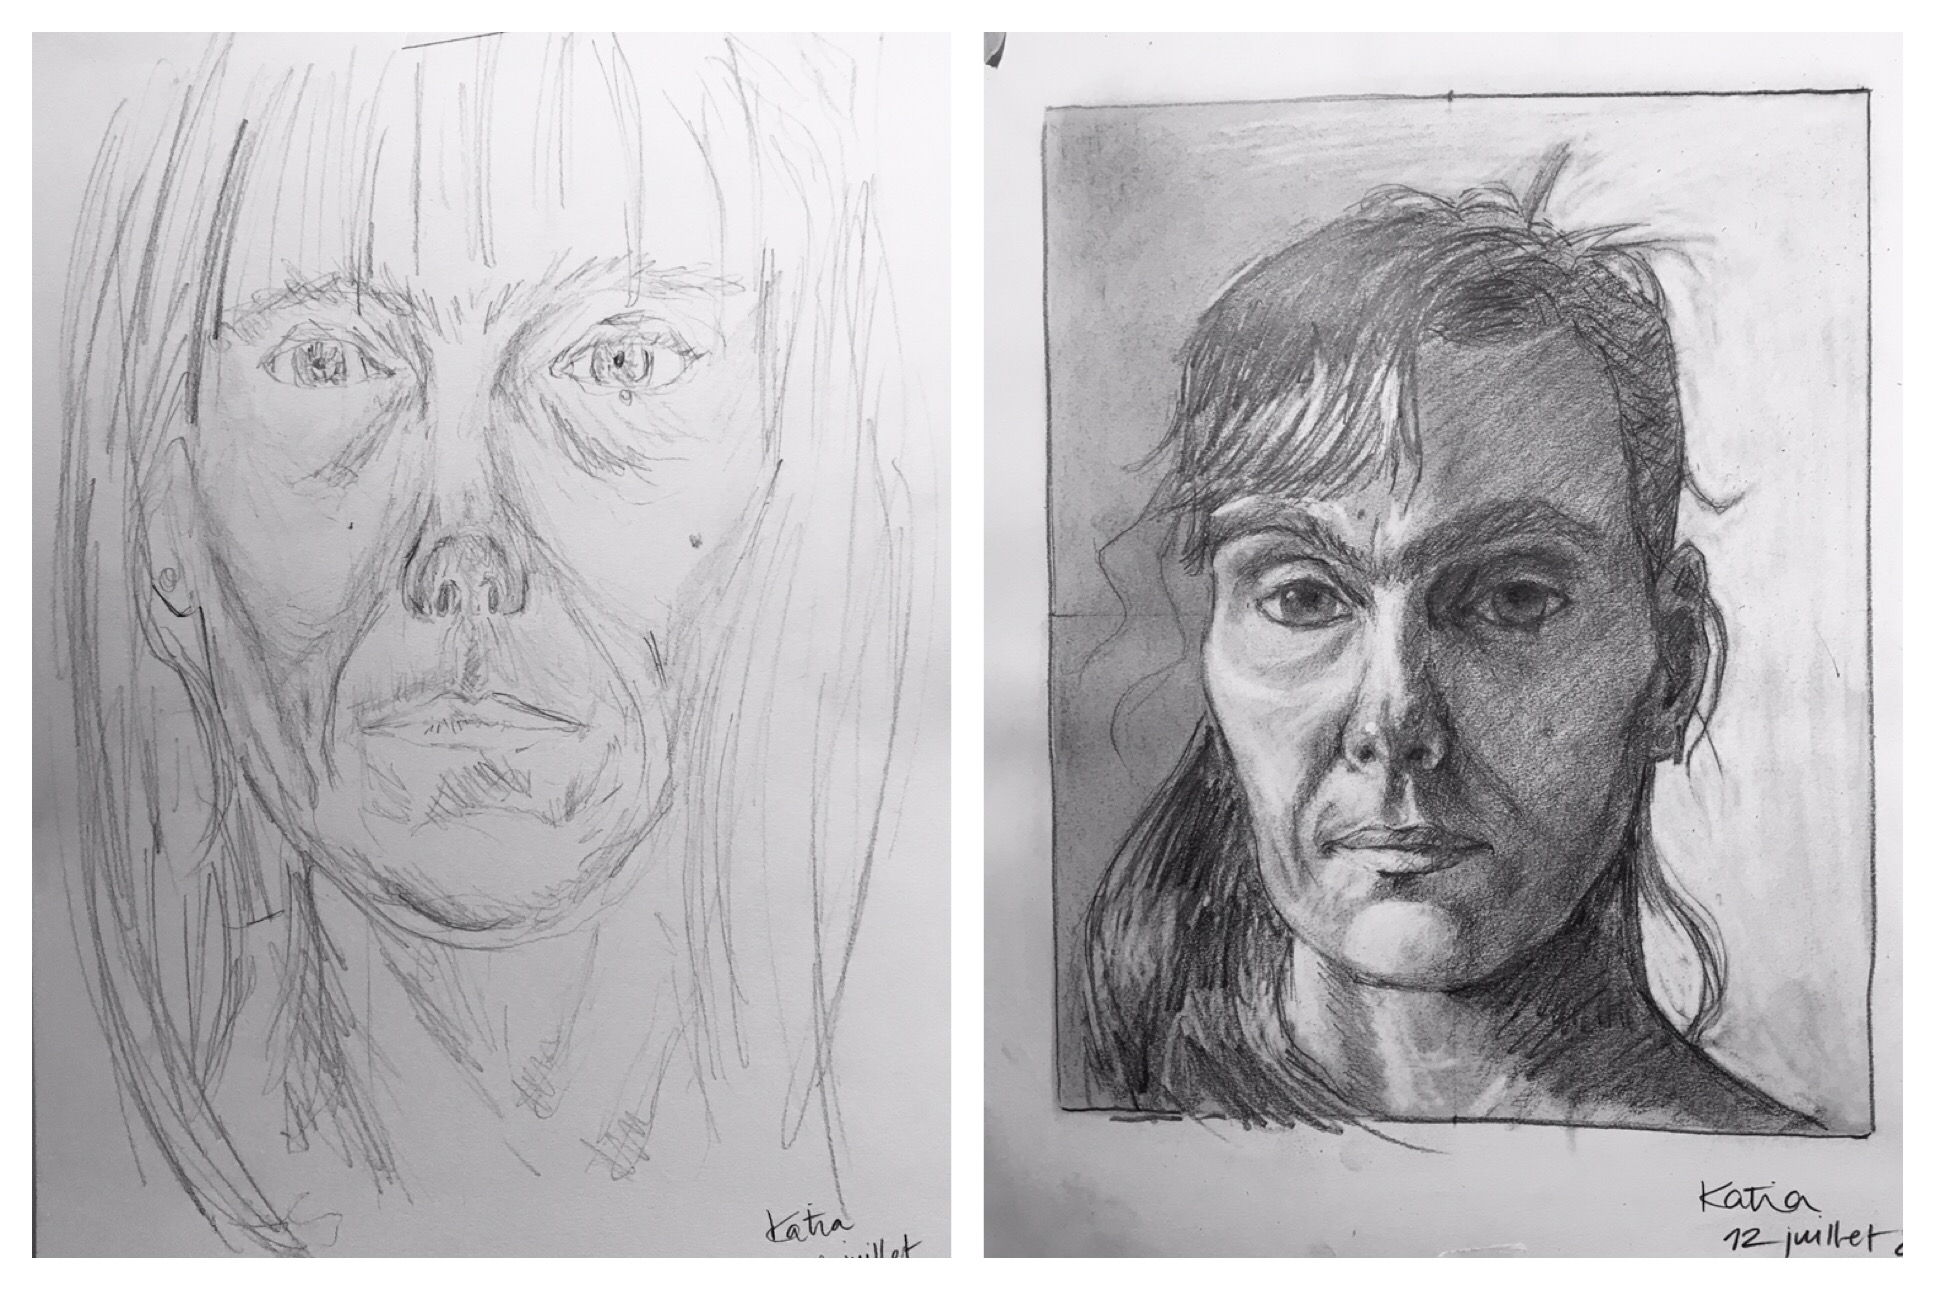 Katia's Before and After Self-Portraits July 2019